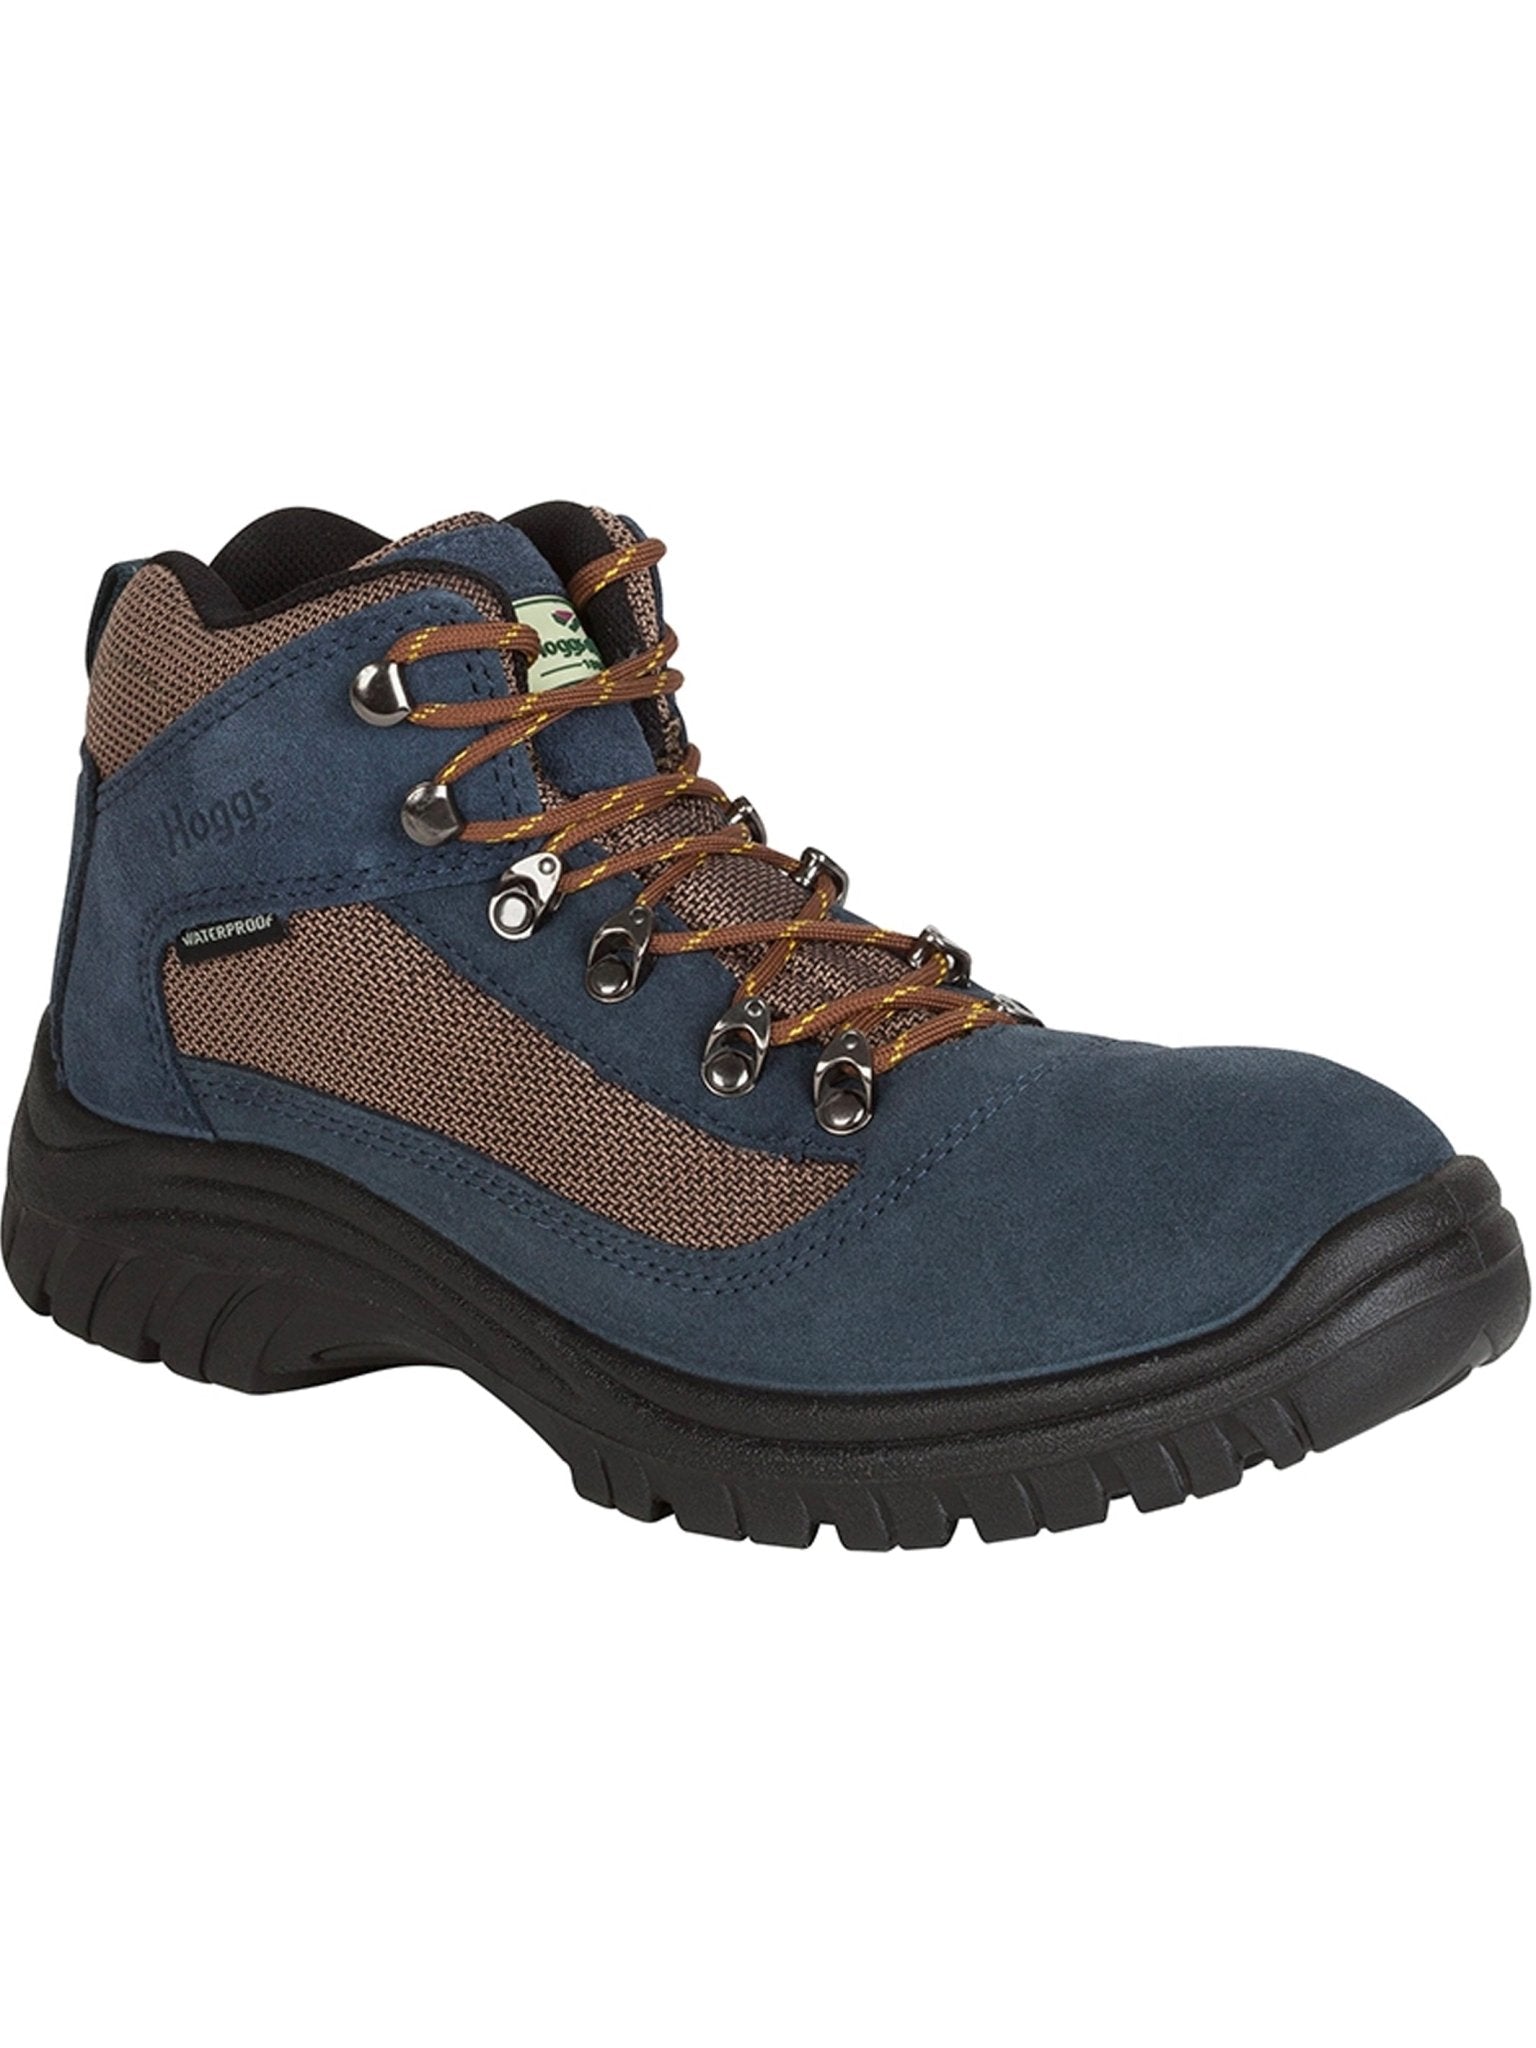 4elementsclothingHoggs of FifeHoggs of Fife - Rambler Waterproof boots, Hiking boot, Lightweight breathable bootsBootsRAMB/NY/040